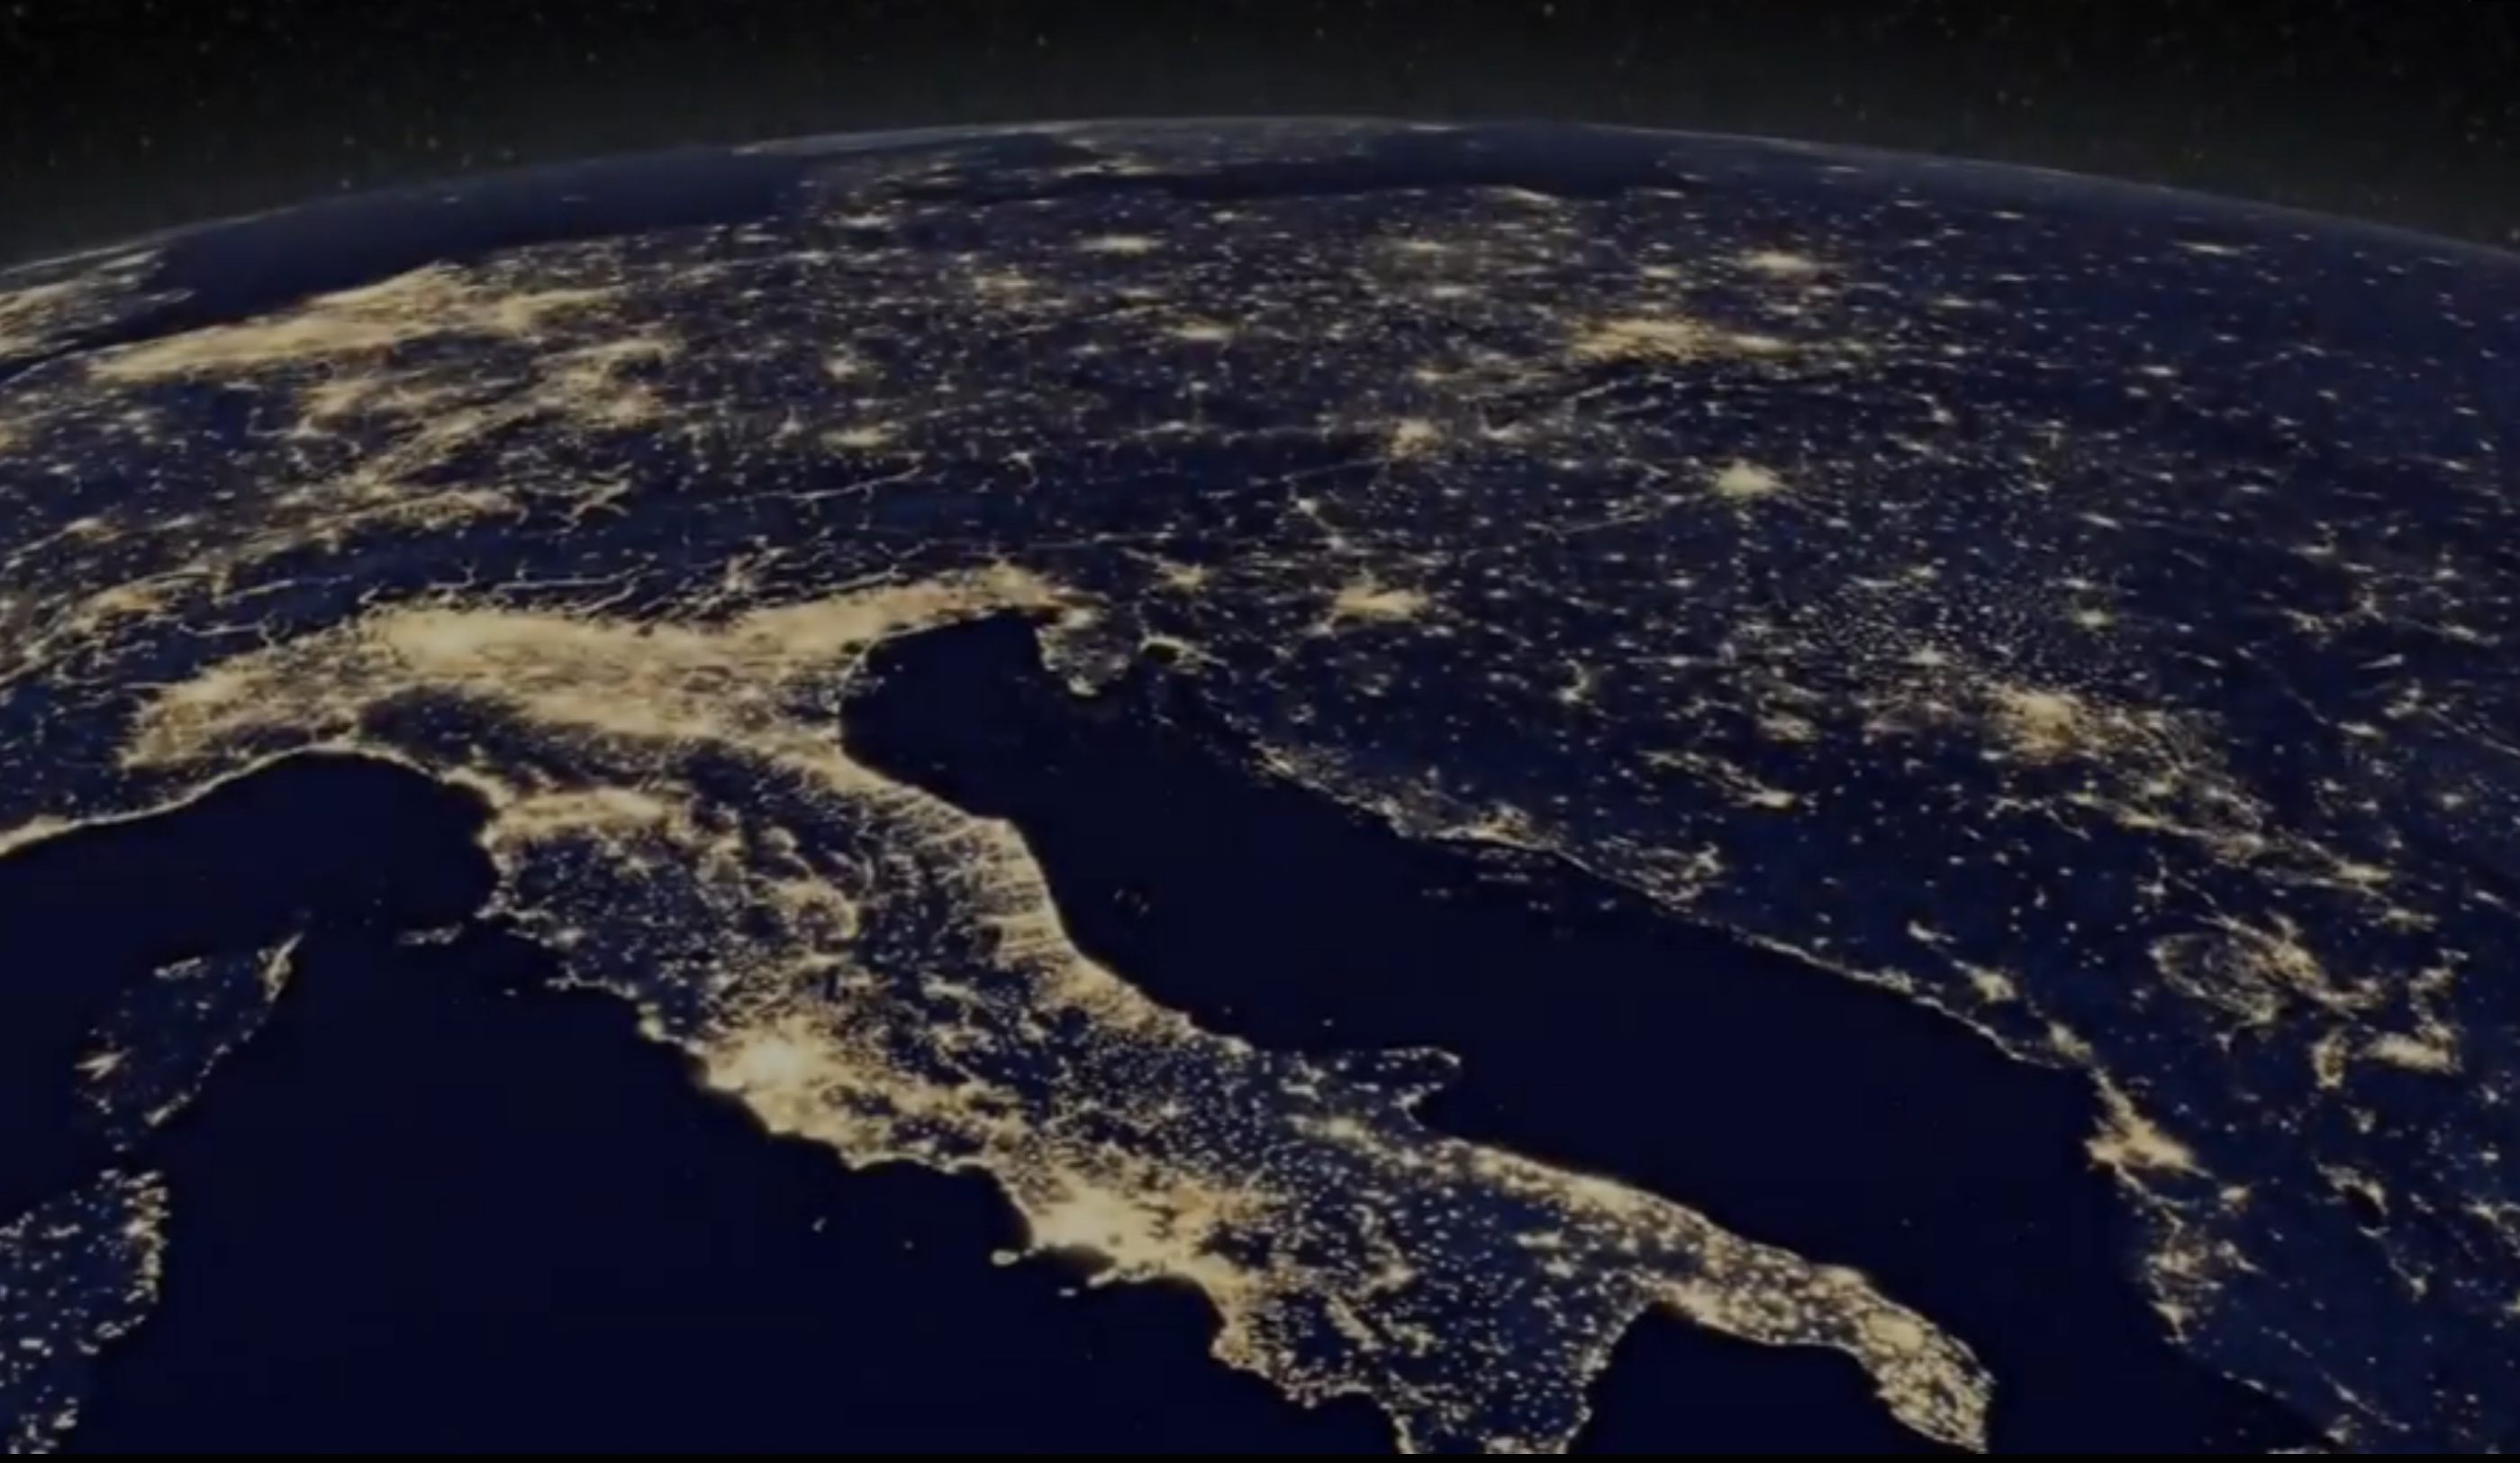 View-from-space-at-night.png